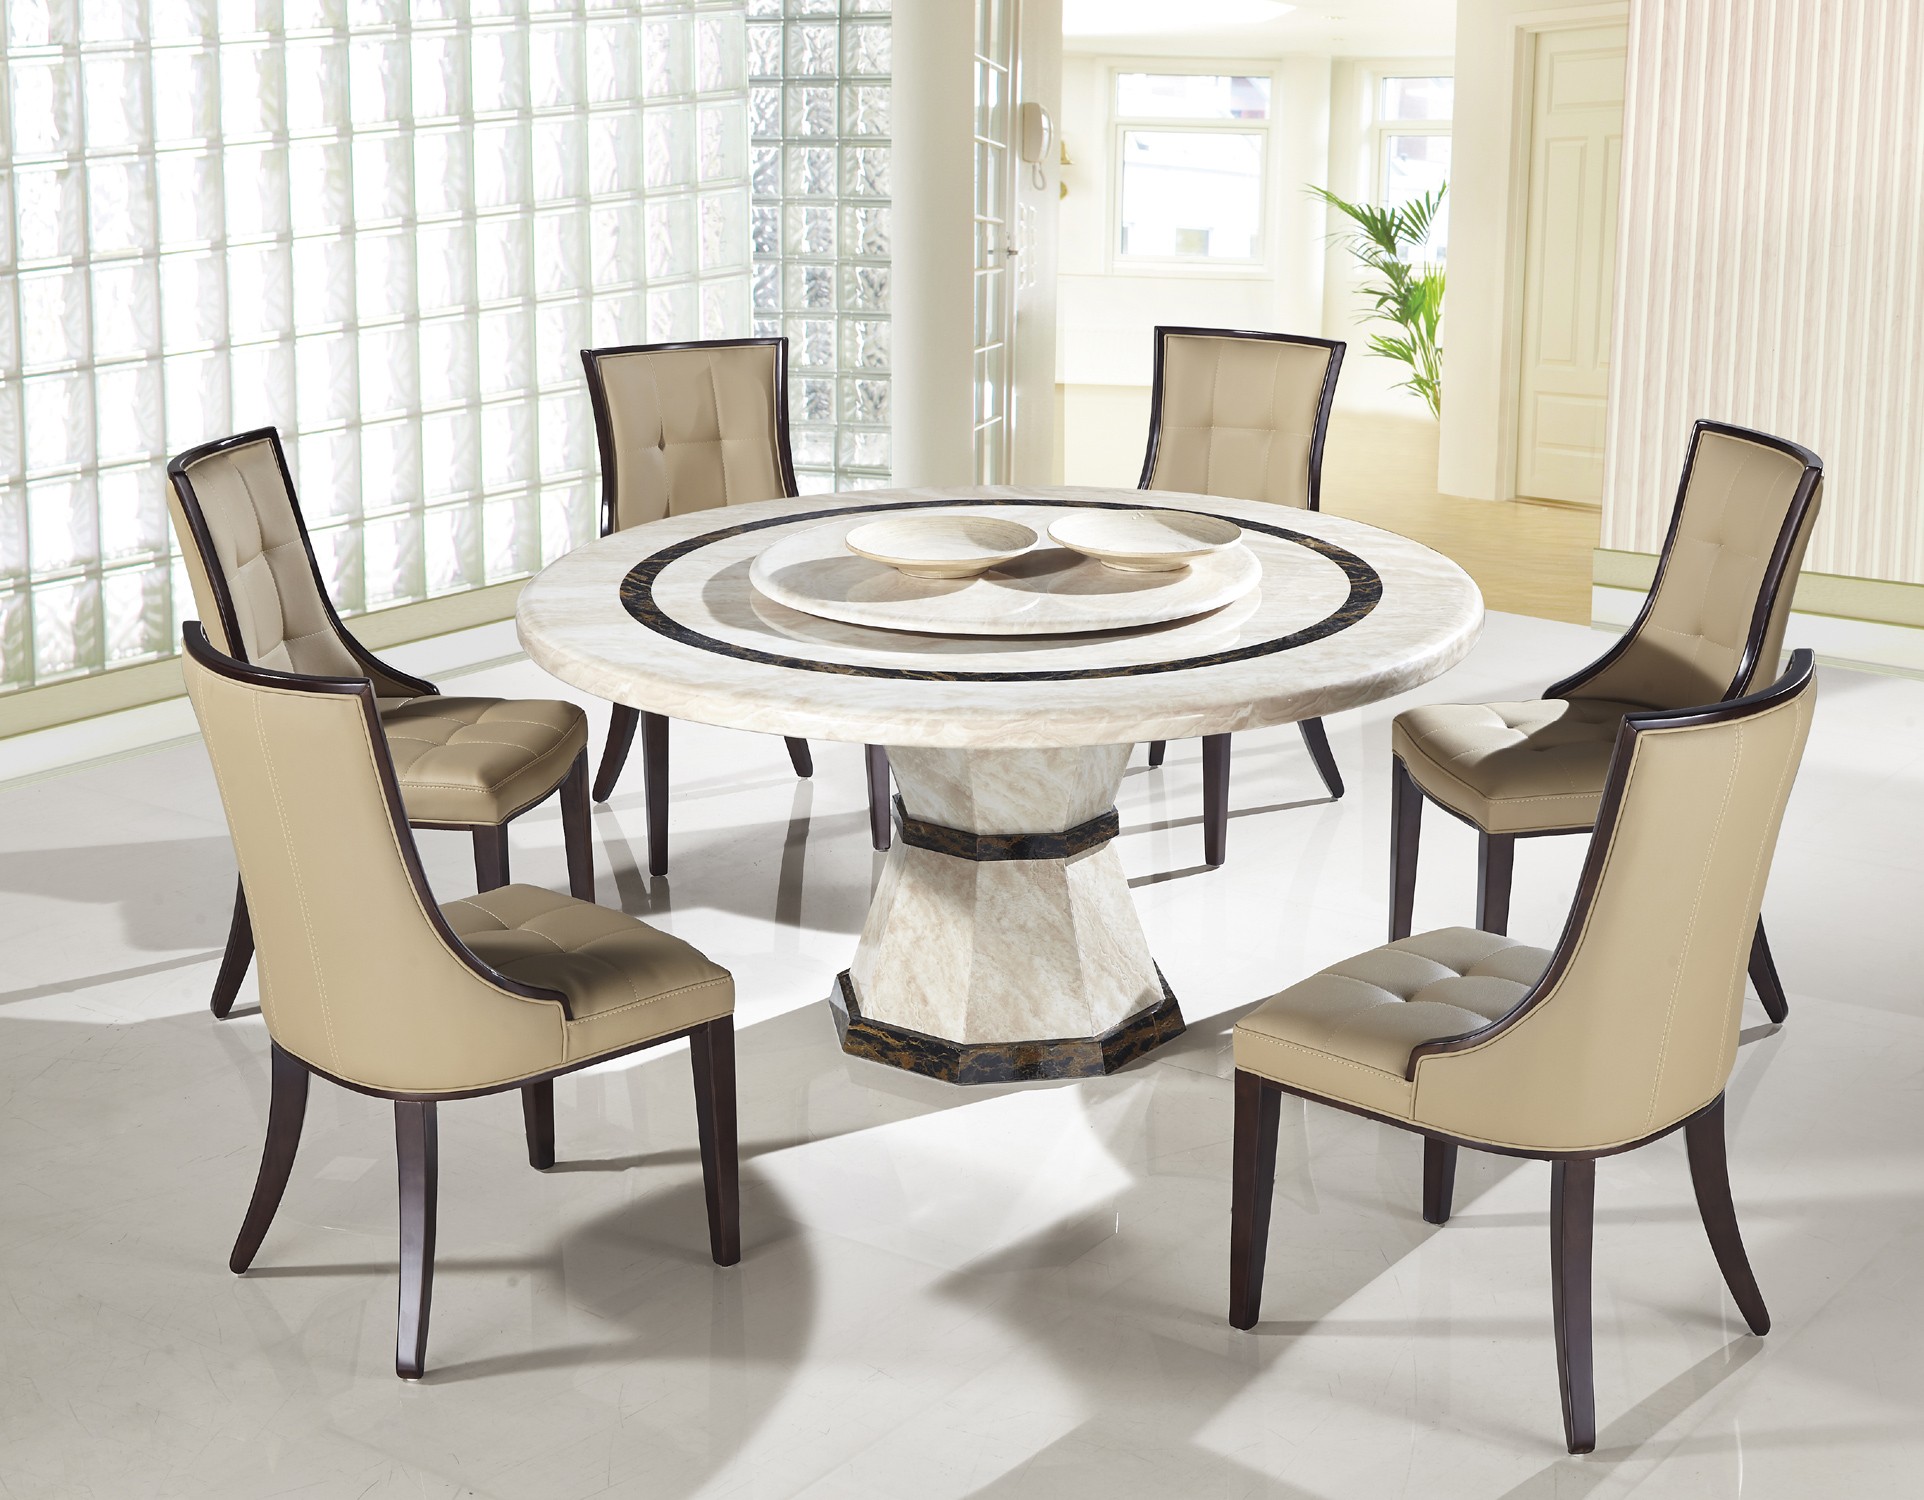 Modern Round Dining Room Table Sets